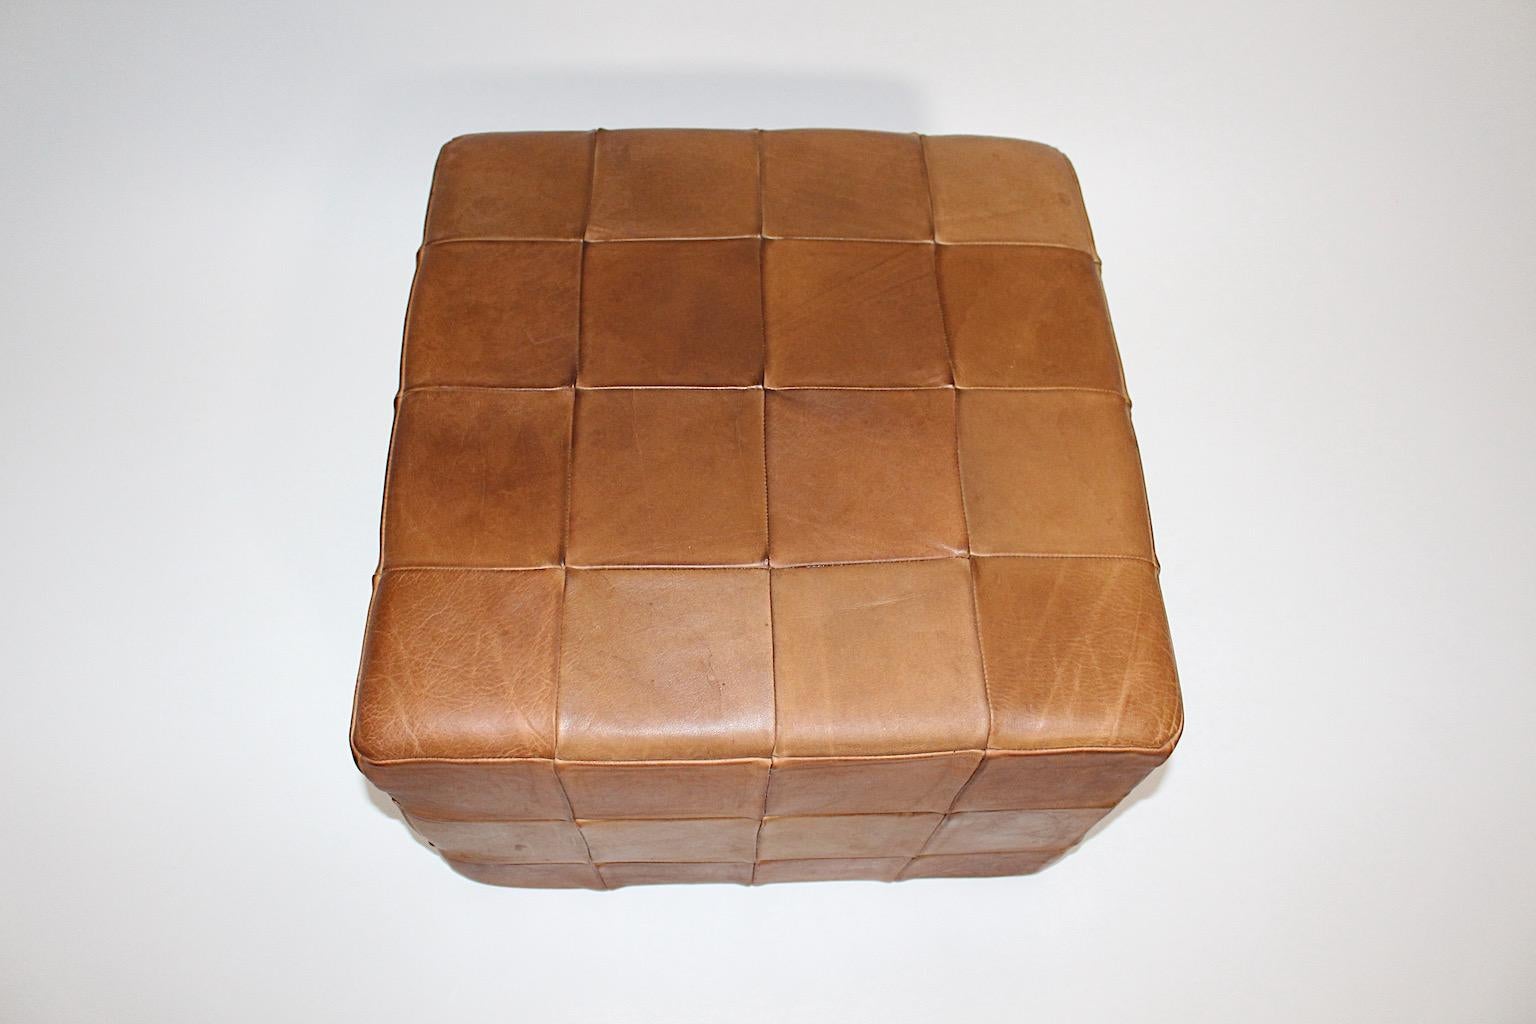 Modernist Organic Vintage Brown Patchwork Leather Cubus Stool DeSede 1970s For Sale 7